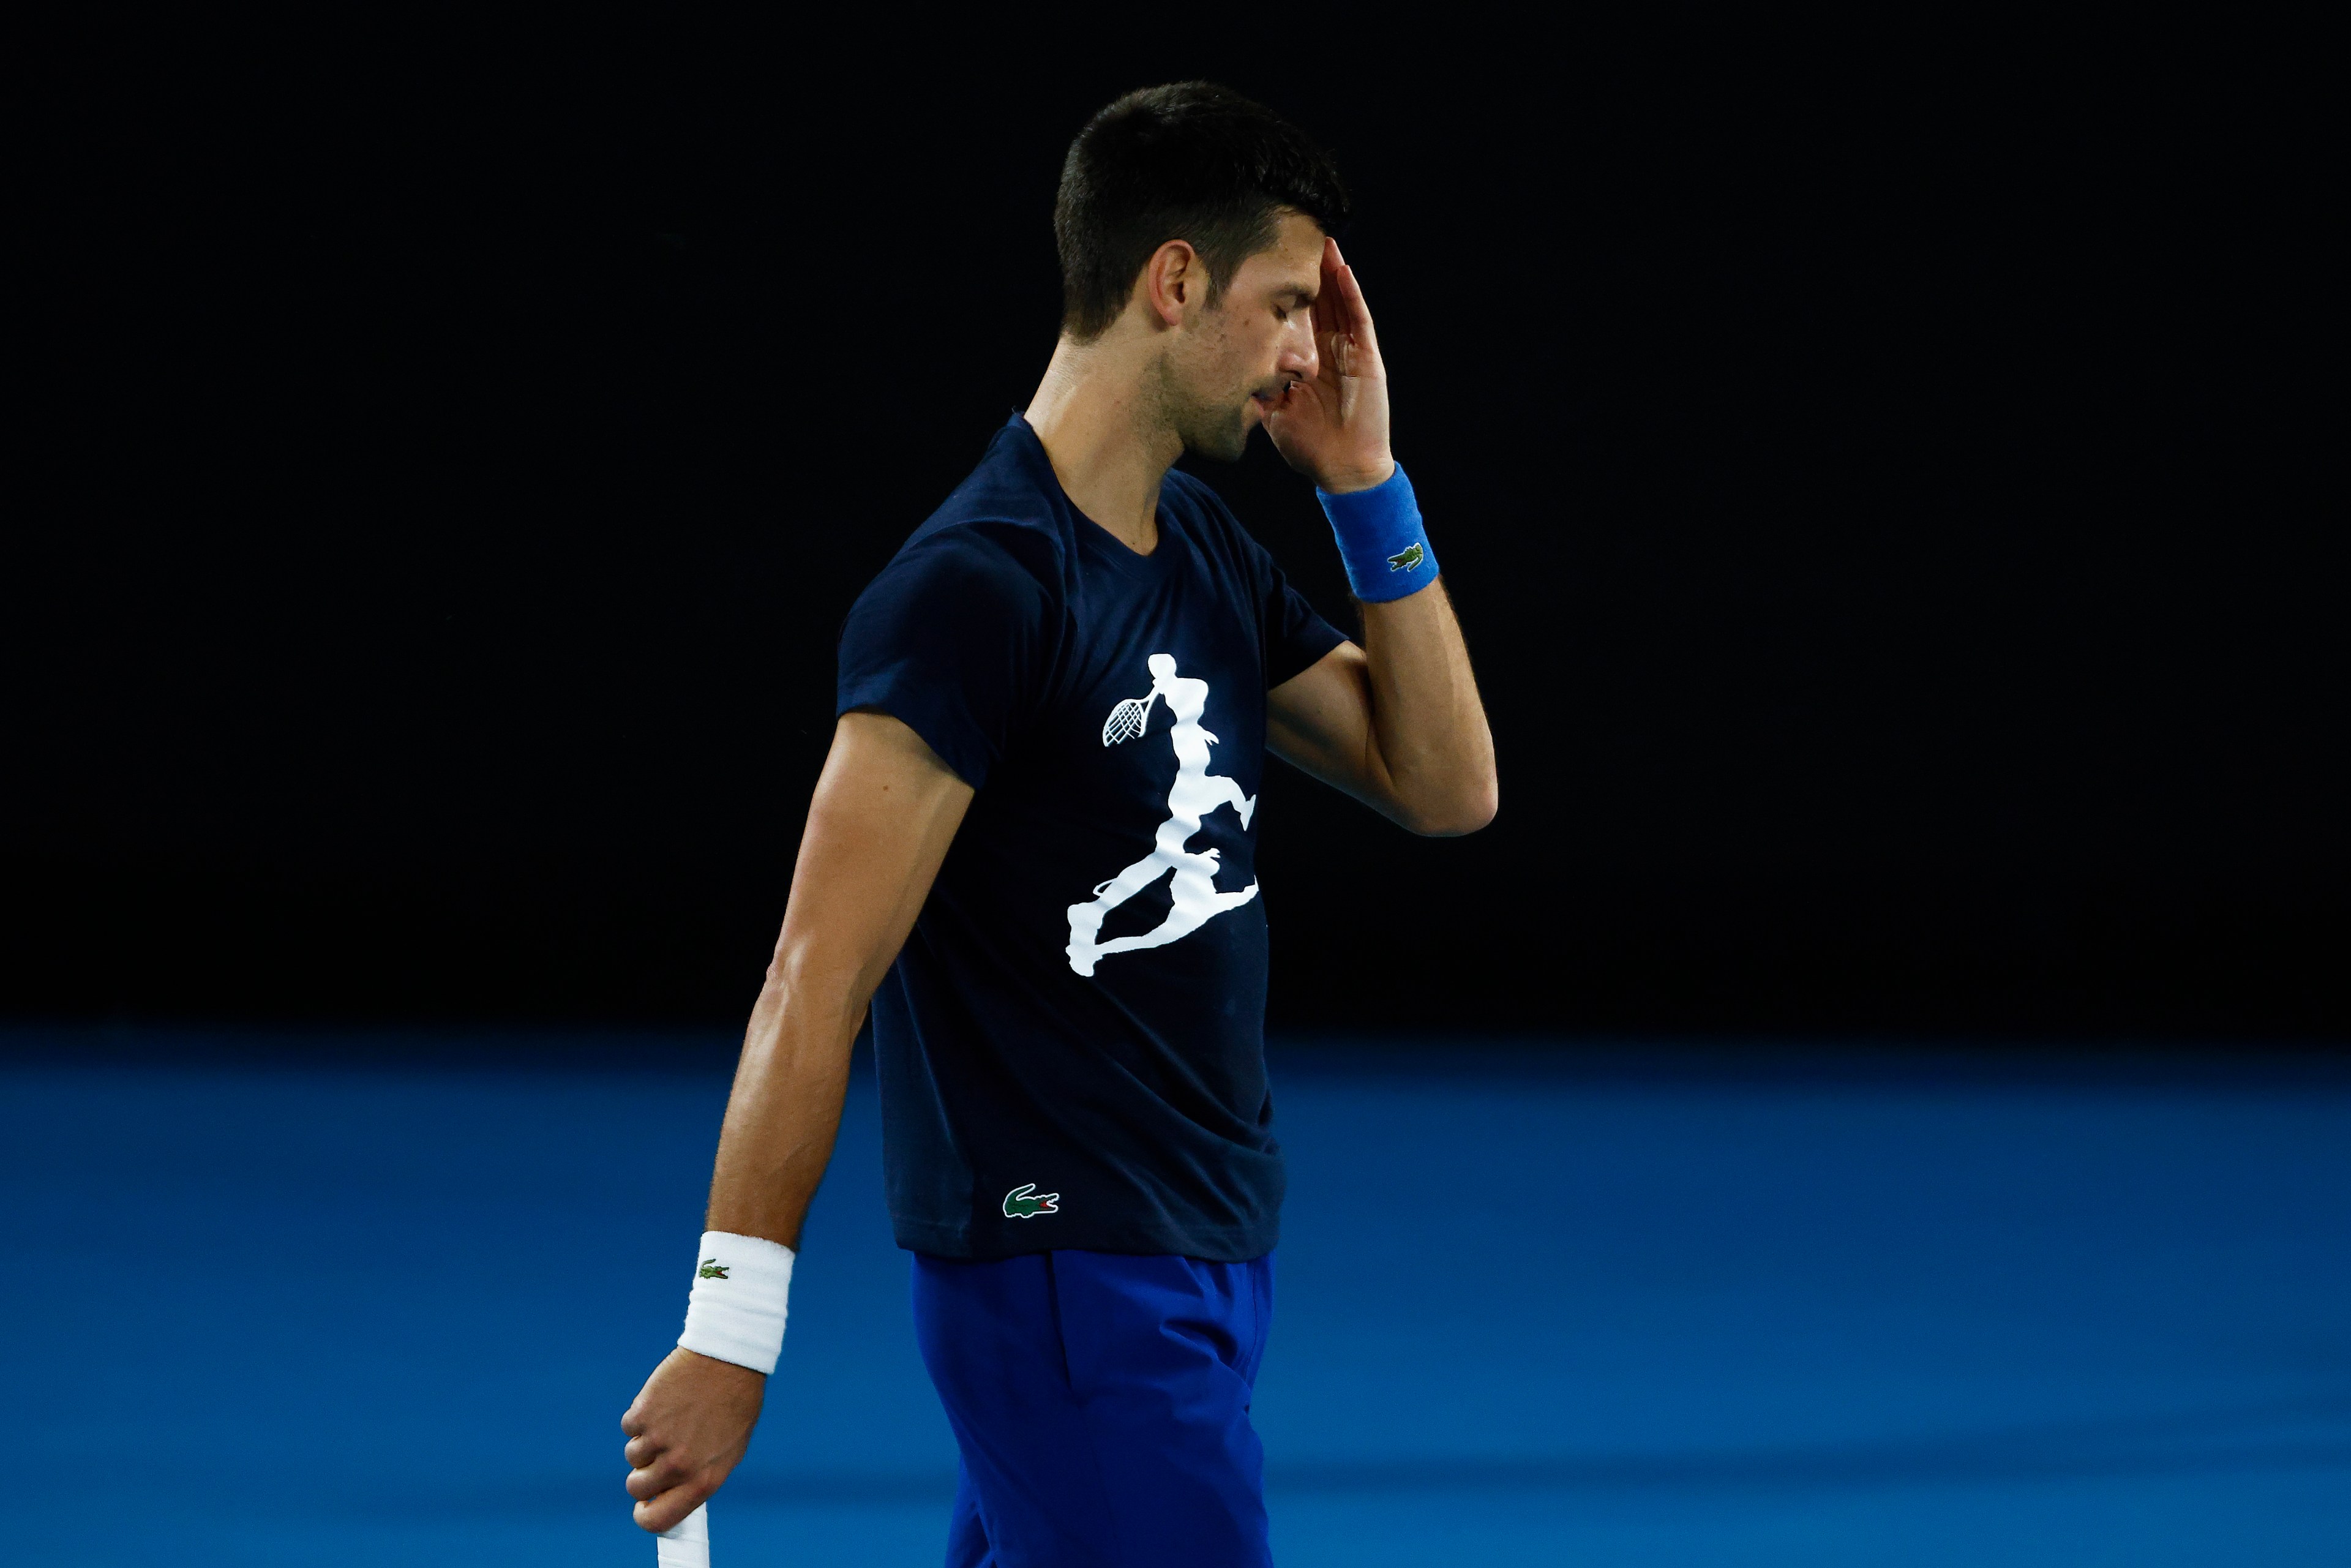 MELBOURNE, AUSTRALIA - JANUARY 14: Novak Djokovic of Serbia reacts during a practice session ahead of the 2022 Australian Open at Melbourne Park on January 14, 2022 in Melbourne, Australia.